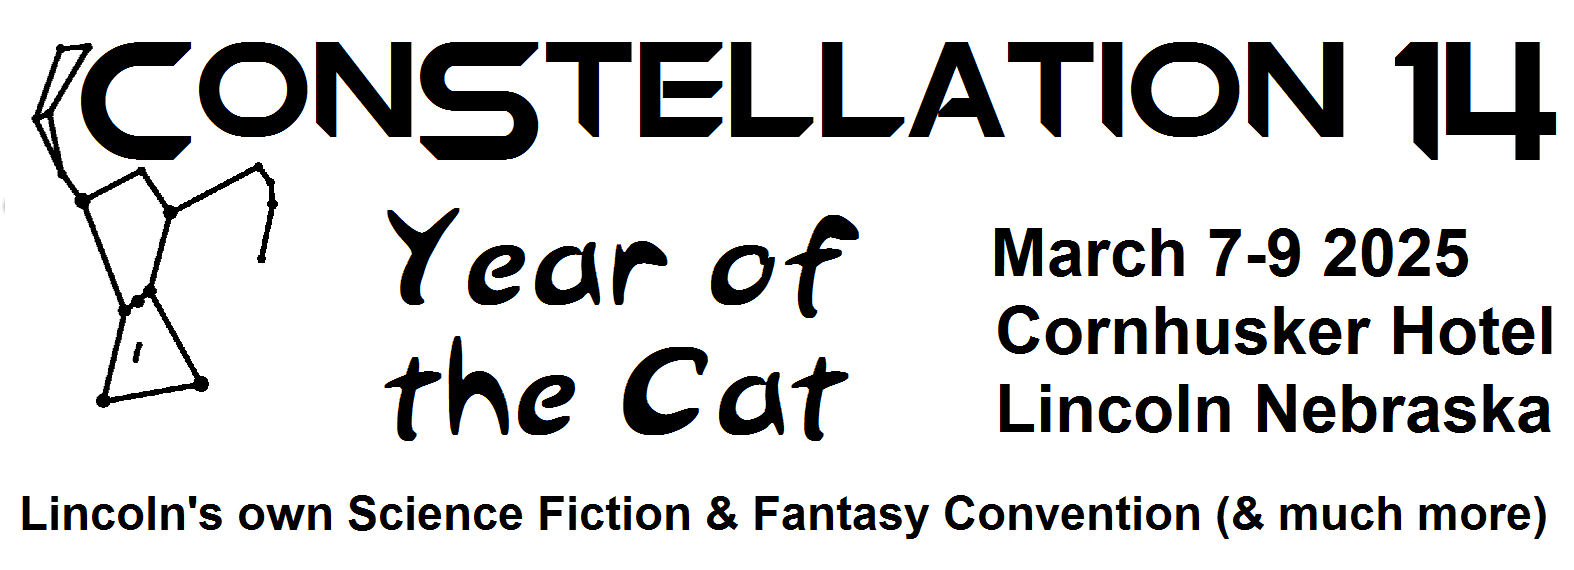 ConStellation 14 Year of the Cat